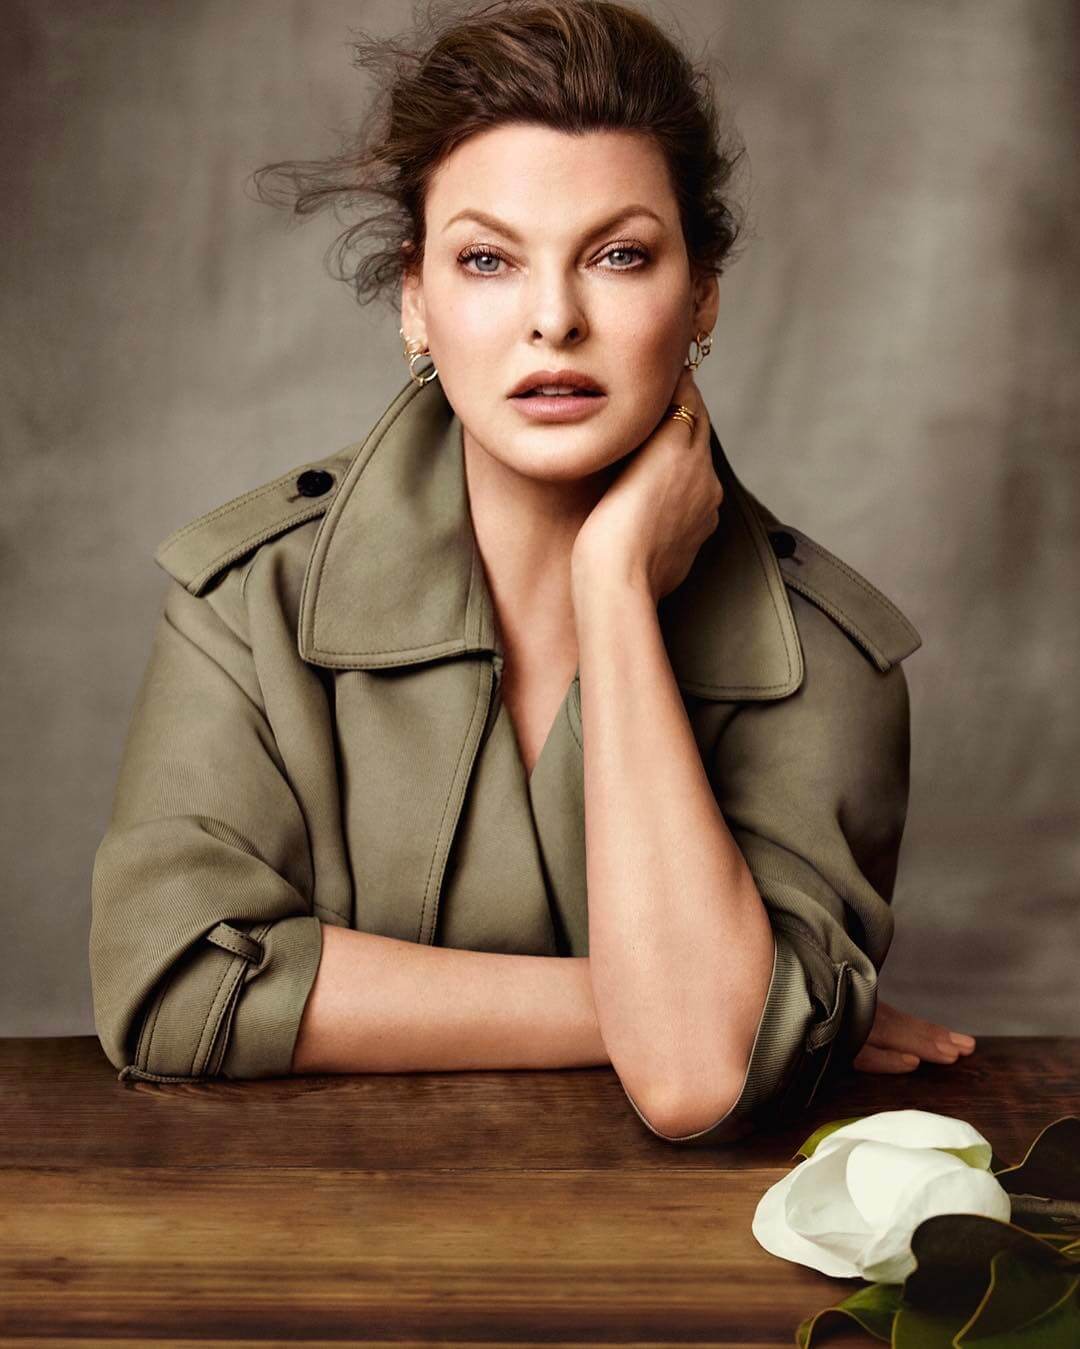 49 Hot Pictures Of Linda Evangelista Will Prove That She Is One Of The Hottest And Sexiest Women There Is | Best Of Comic Books